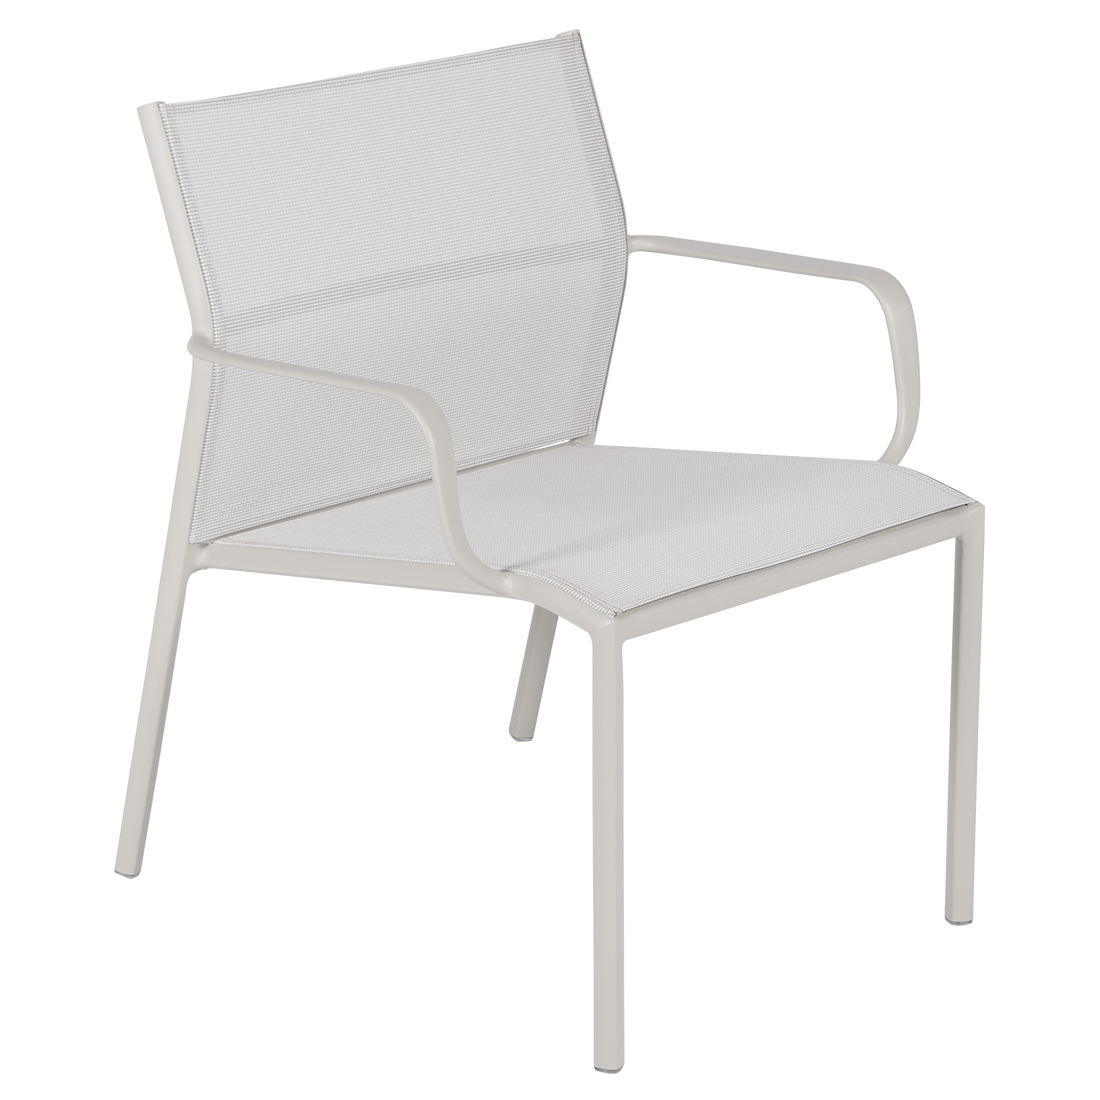 Cadiz low armchair by Fermob and available from le petit jardin